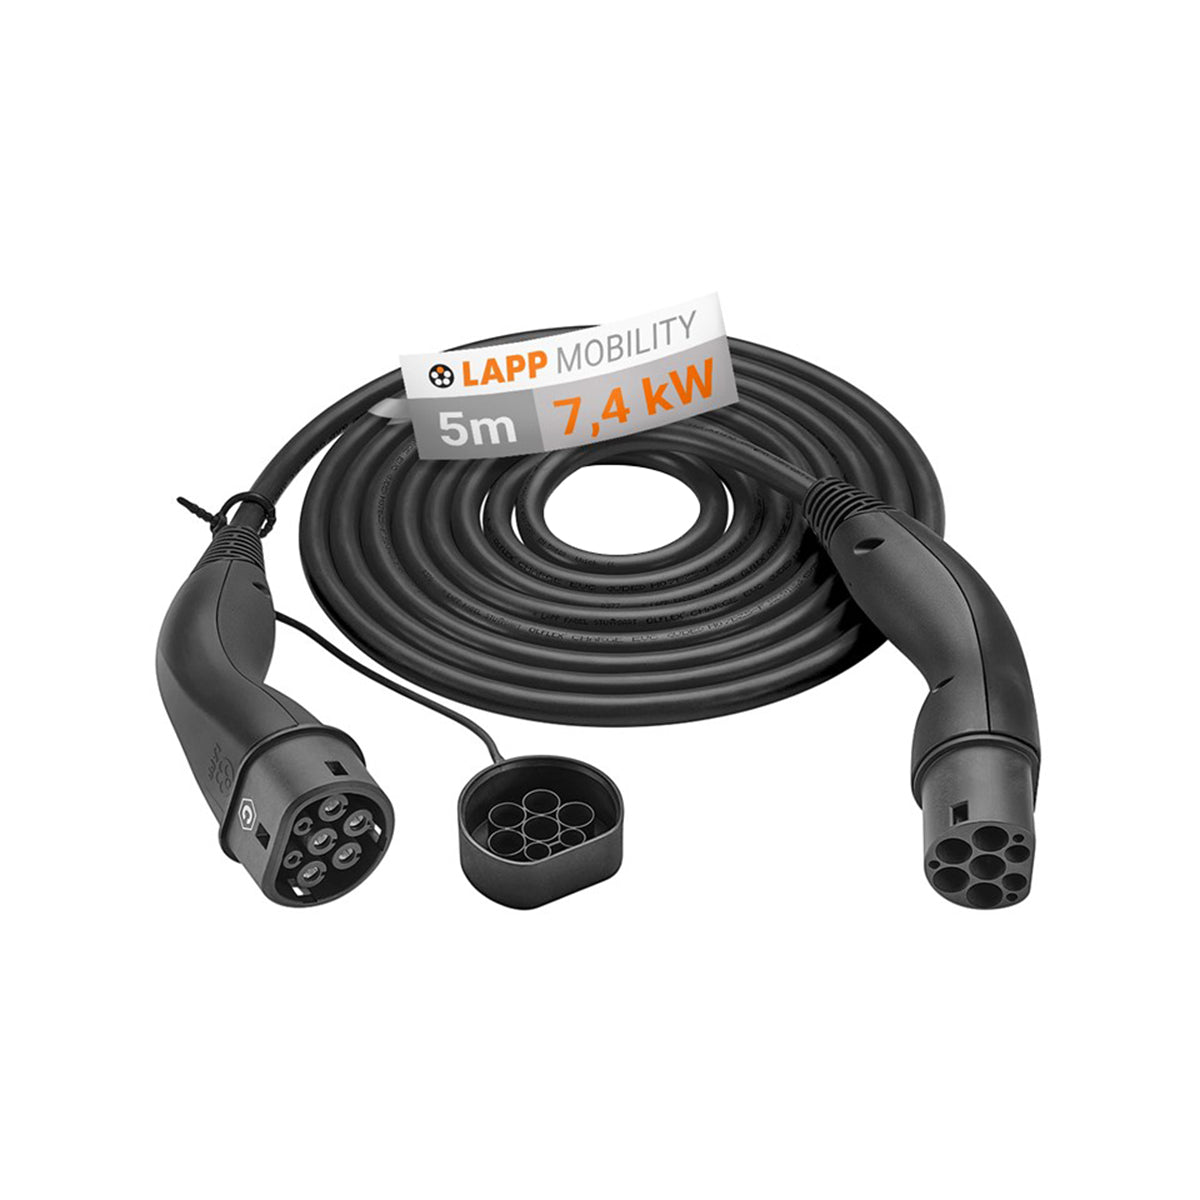 LAPP EV Helix Charge Cable Type 2 (7.4kW-1P-32A) 5m for Hybrid and Electric Cars - Black.